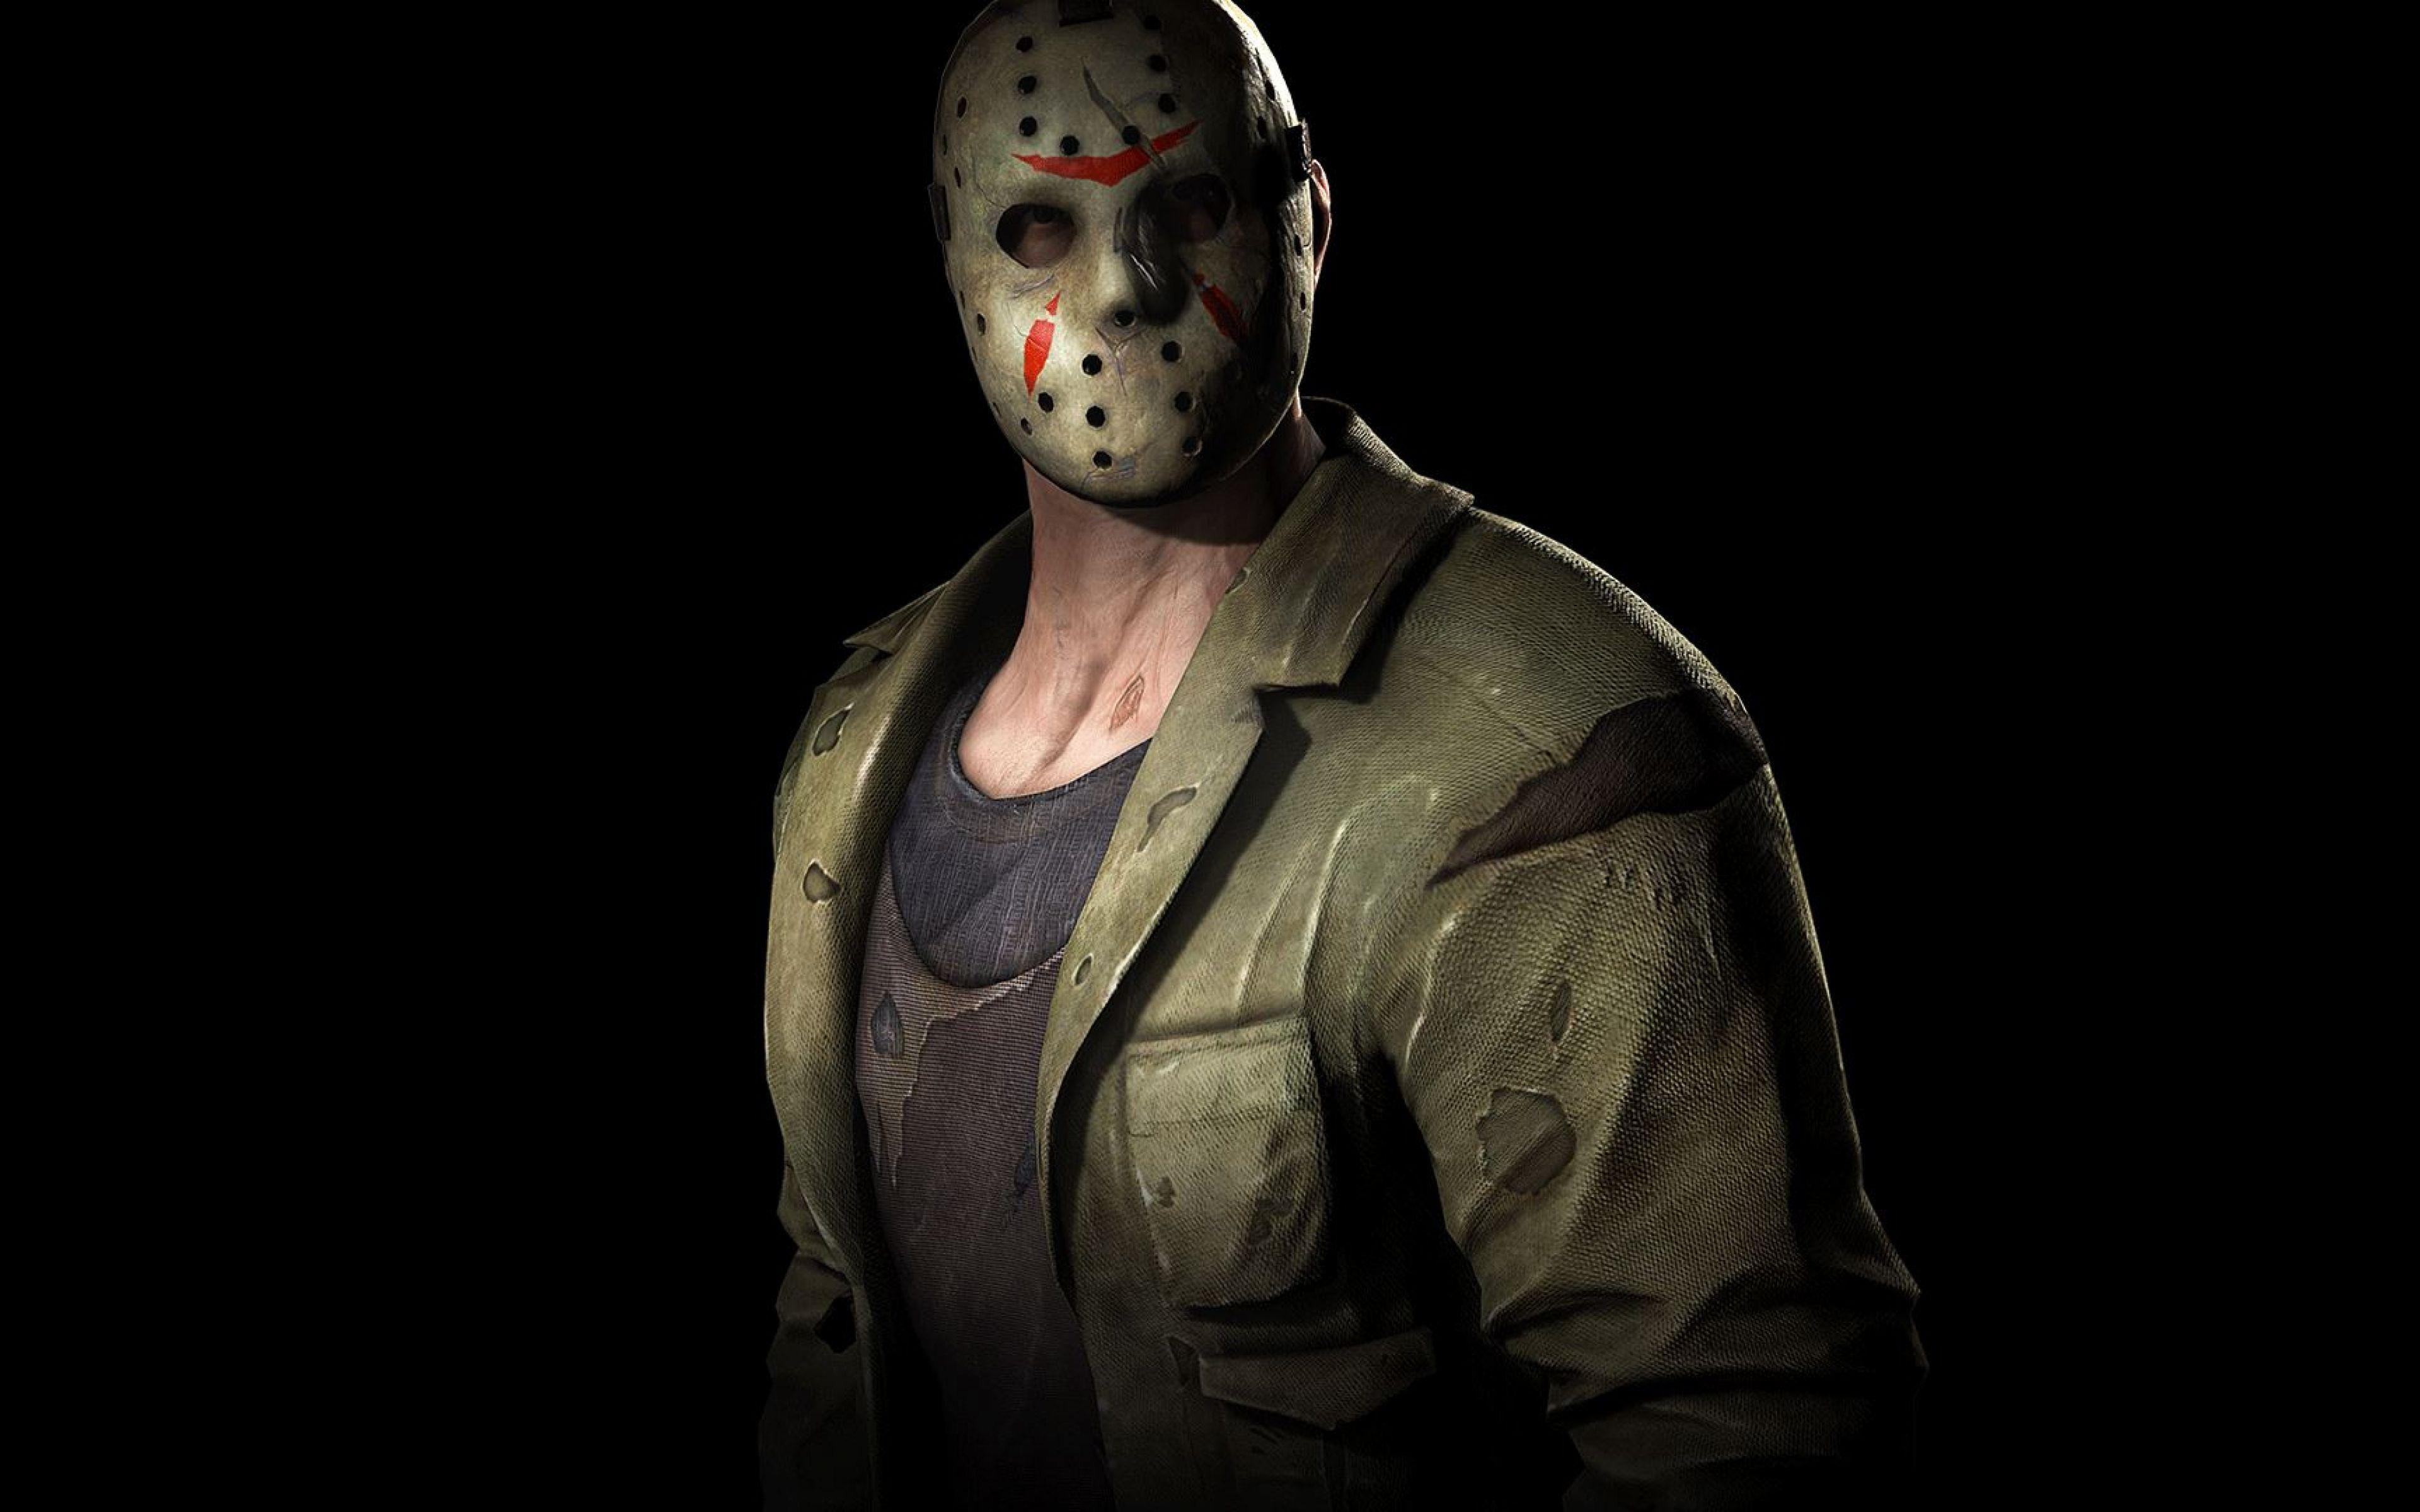 Download Wallpaper 3840x2400 Jason voorhees, Friday the 13th